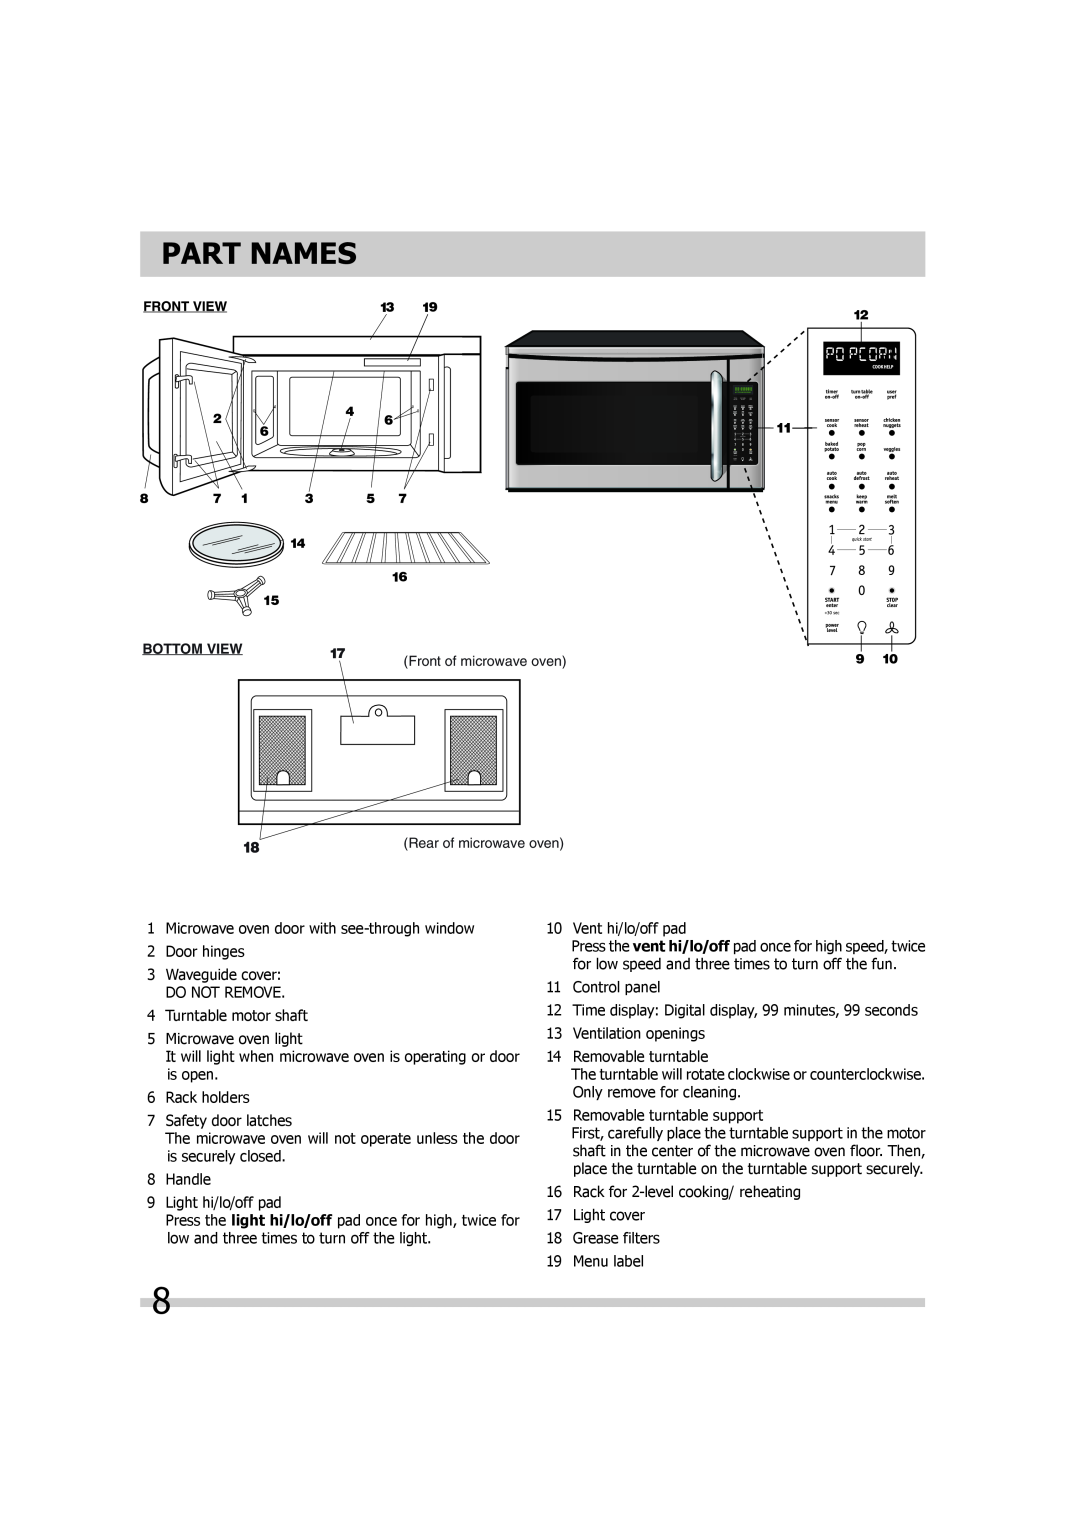 Frigidaire 316495055 important safety instructions Part Names, Bottom View 